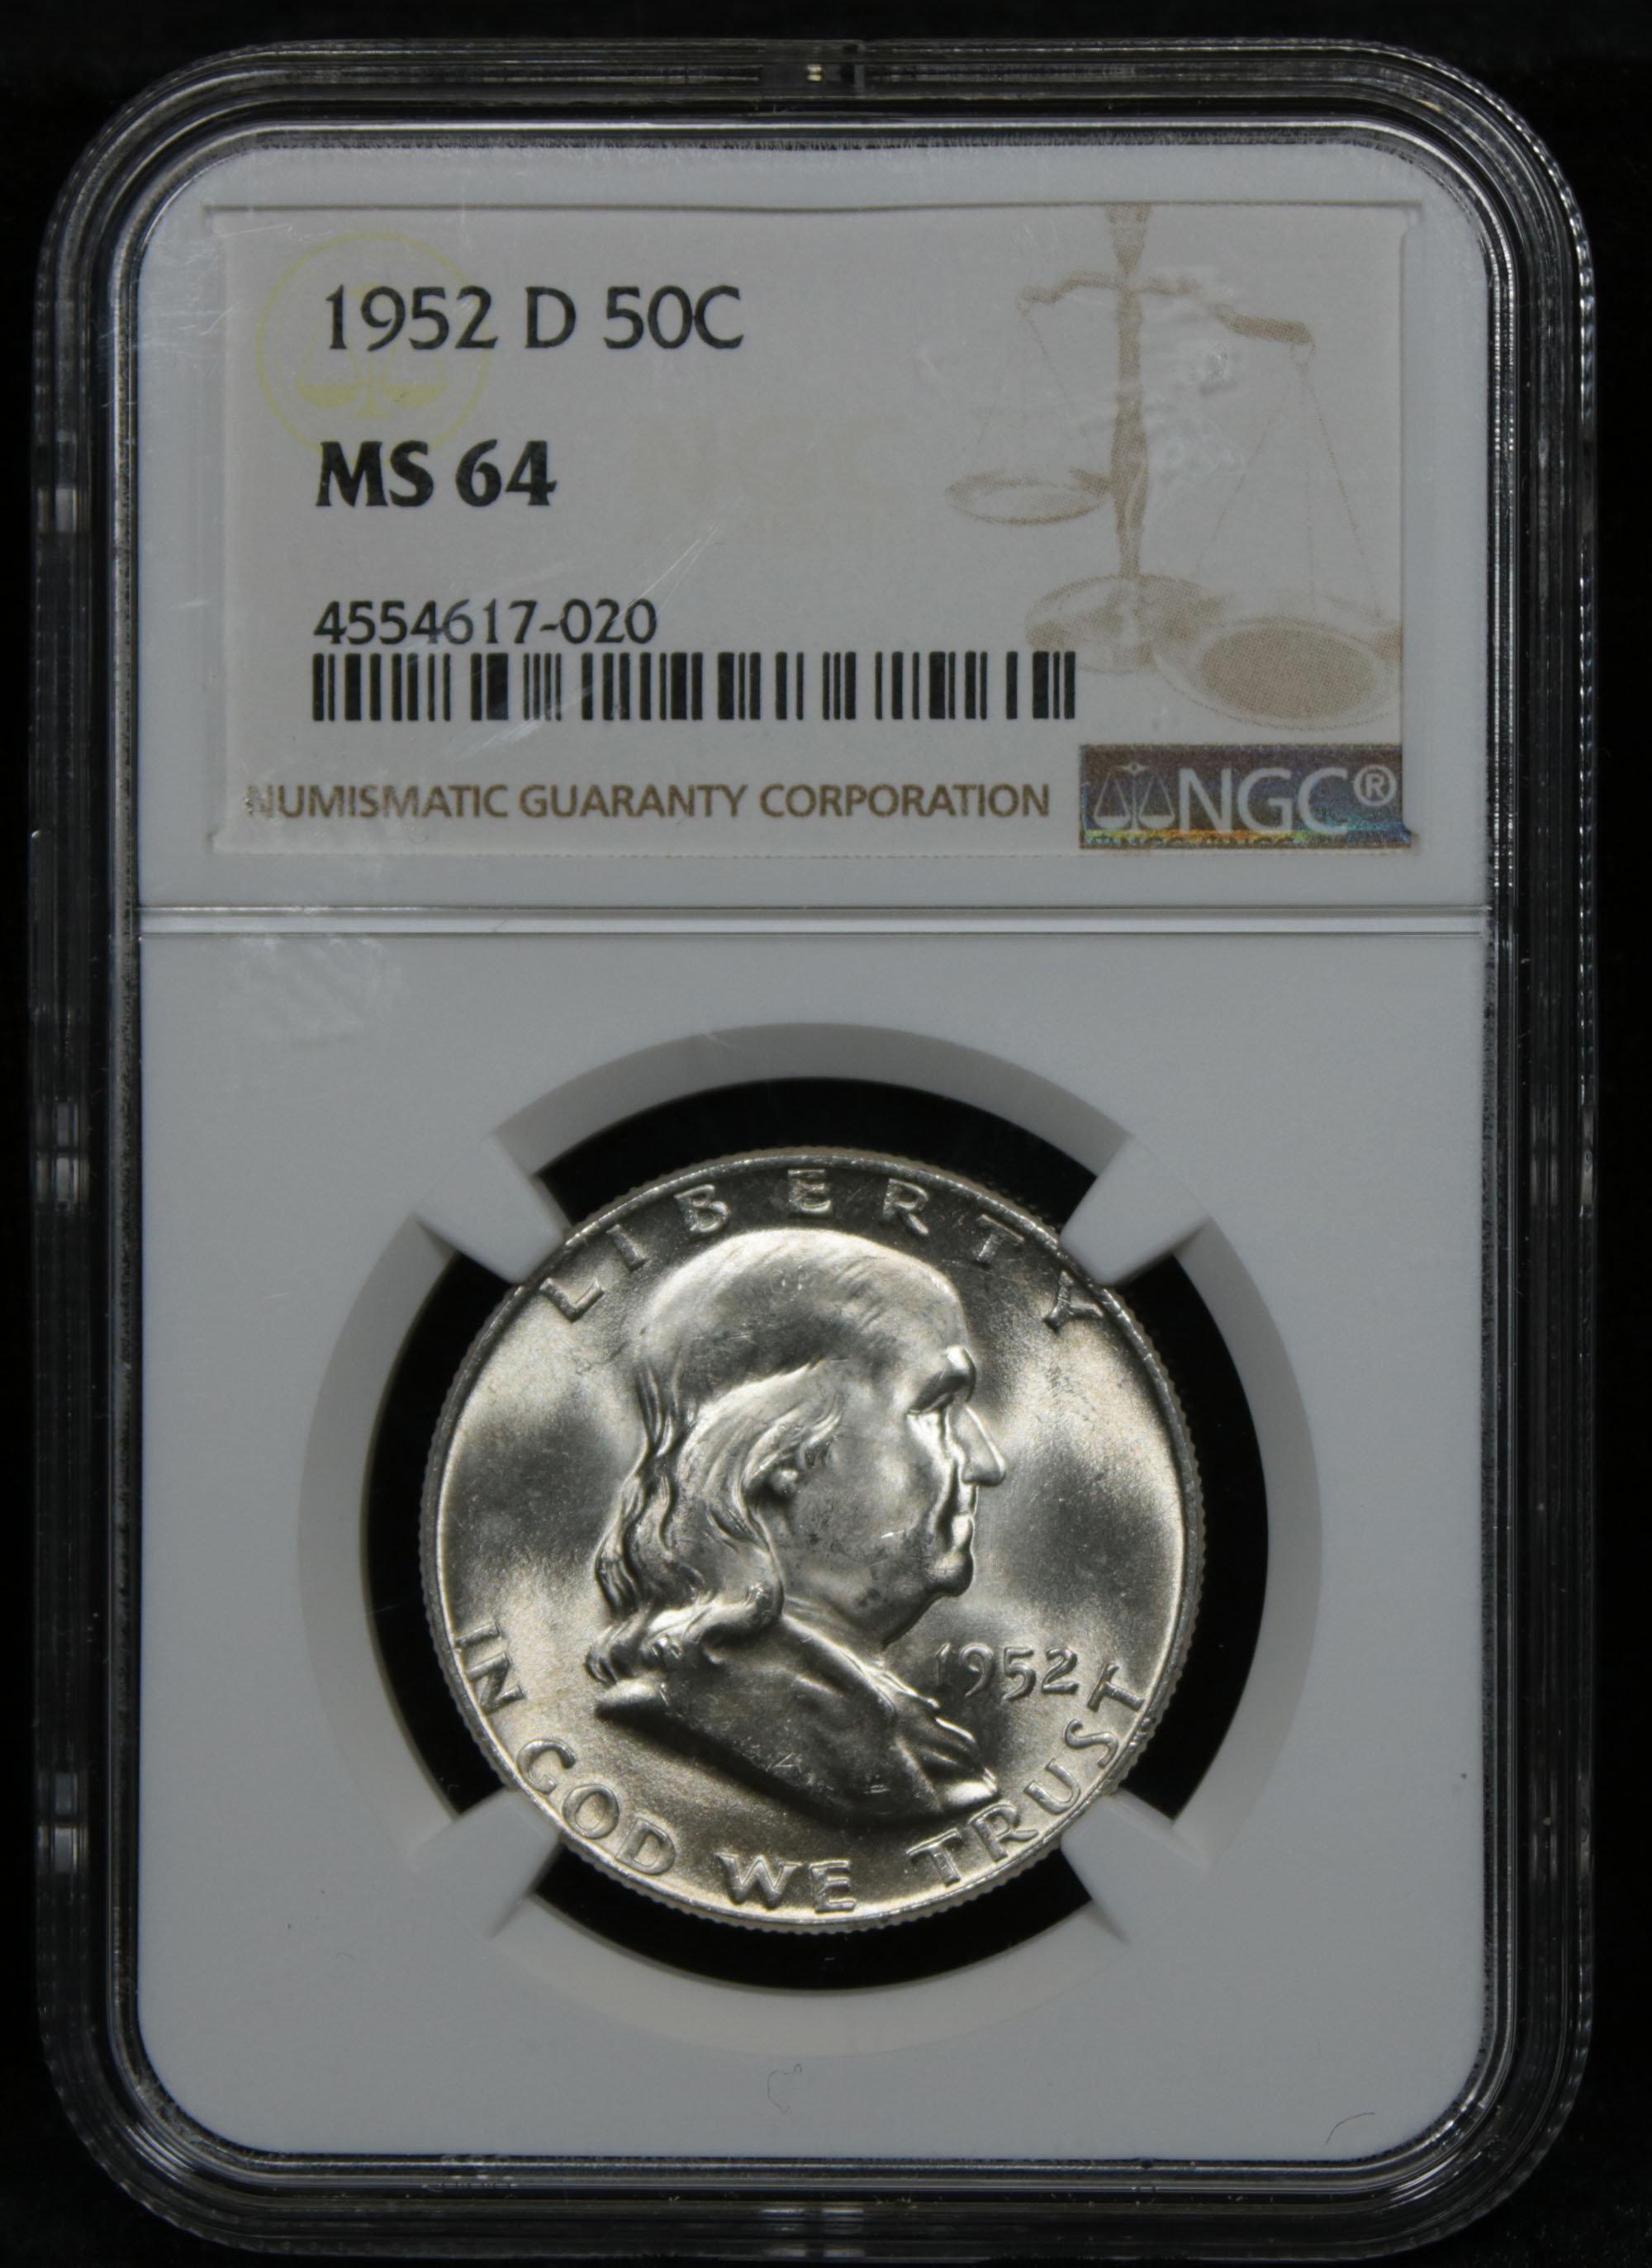 NGC 1952-d Franklin Half Dollar 50c Graded ms64 By NGC